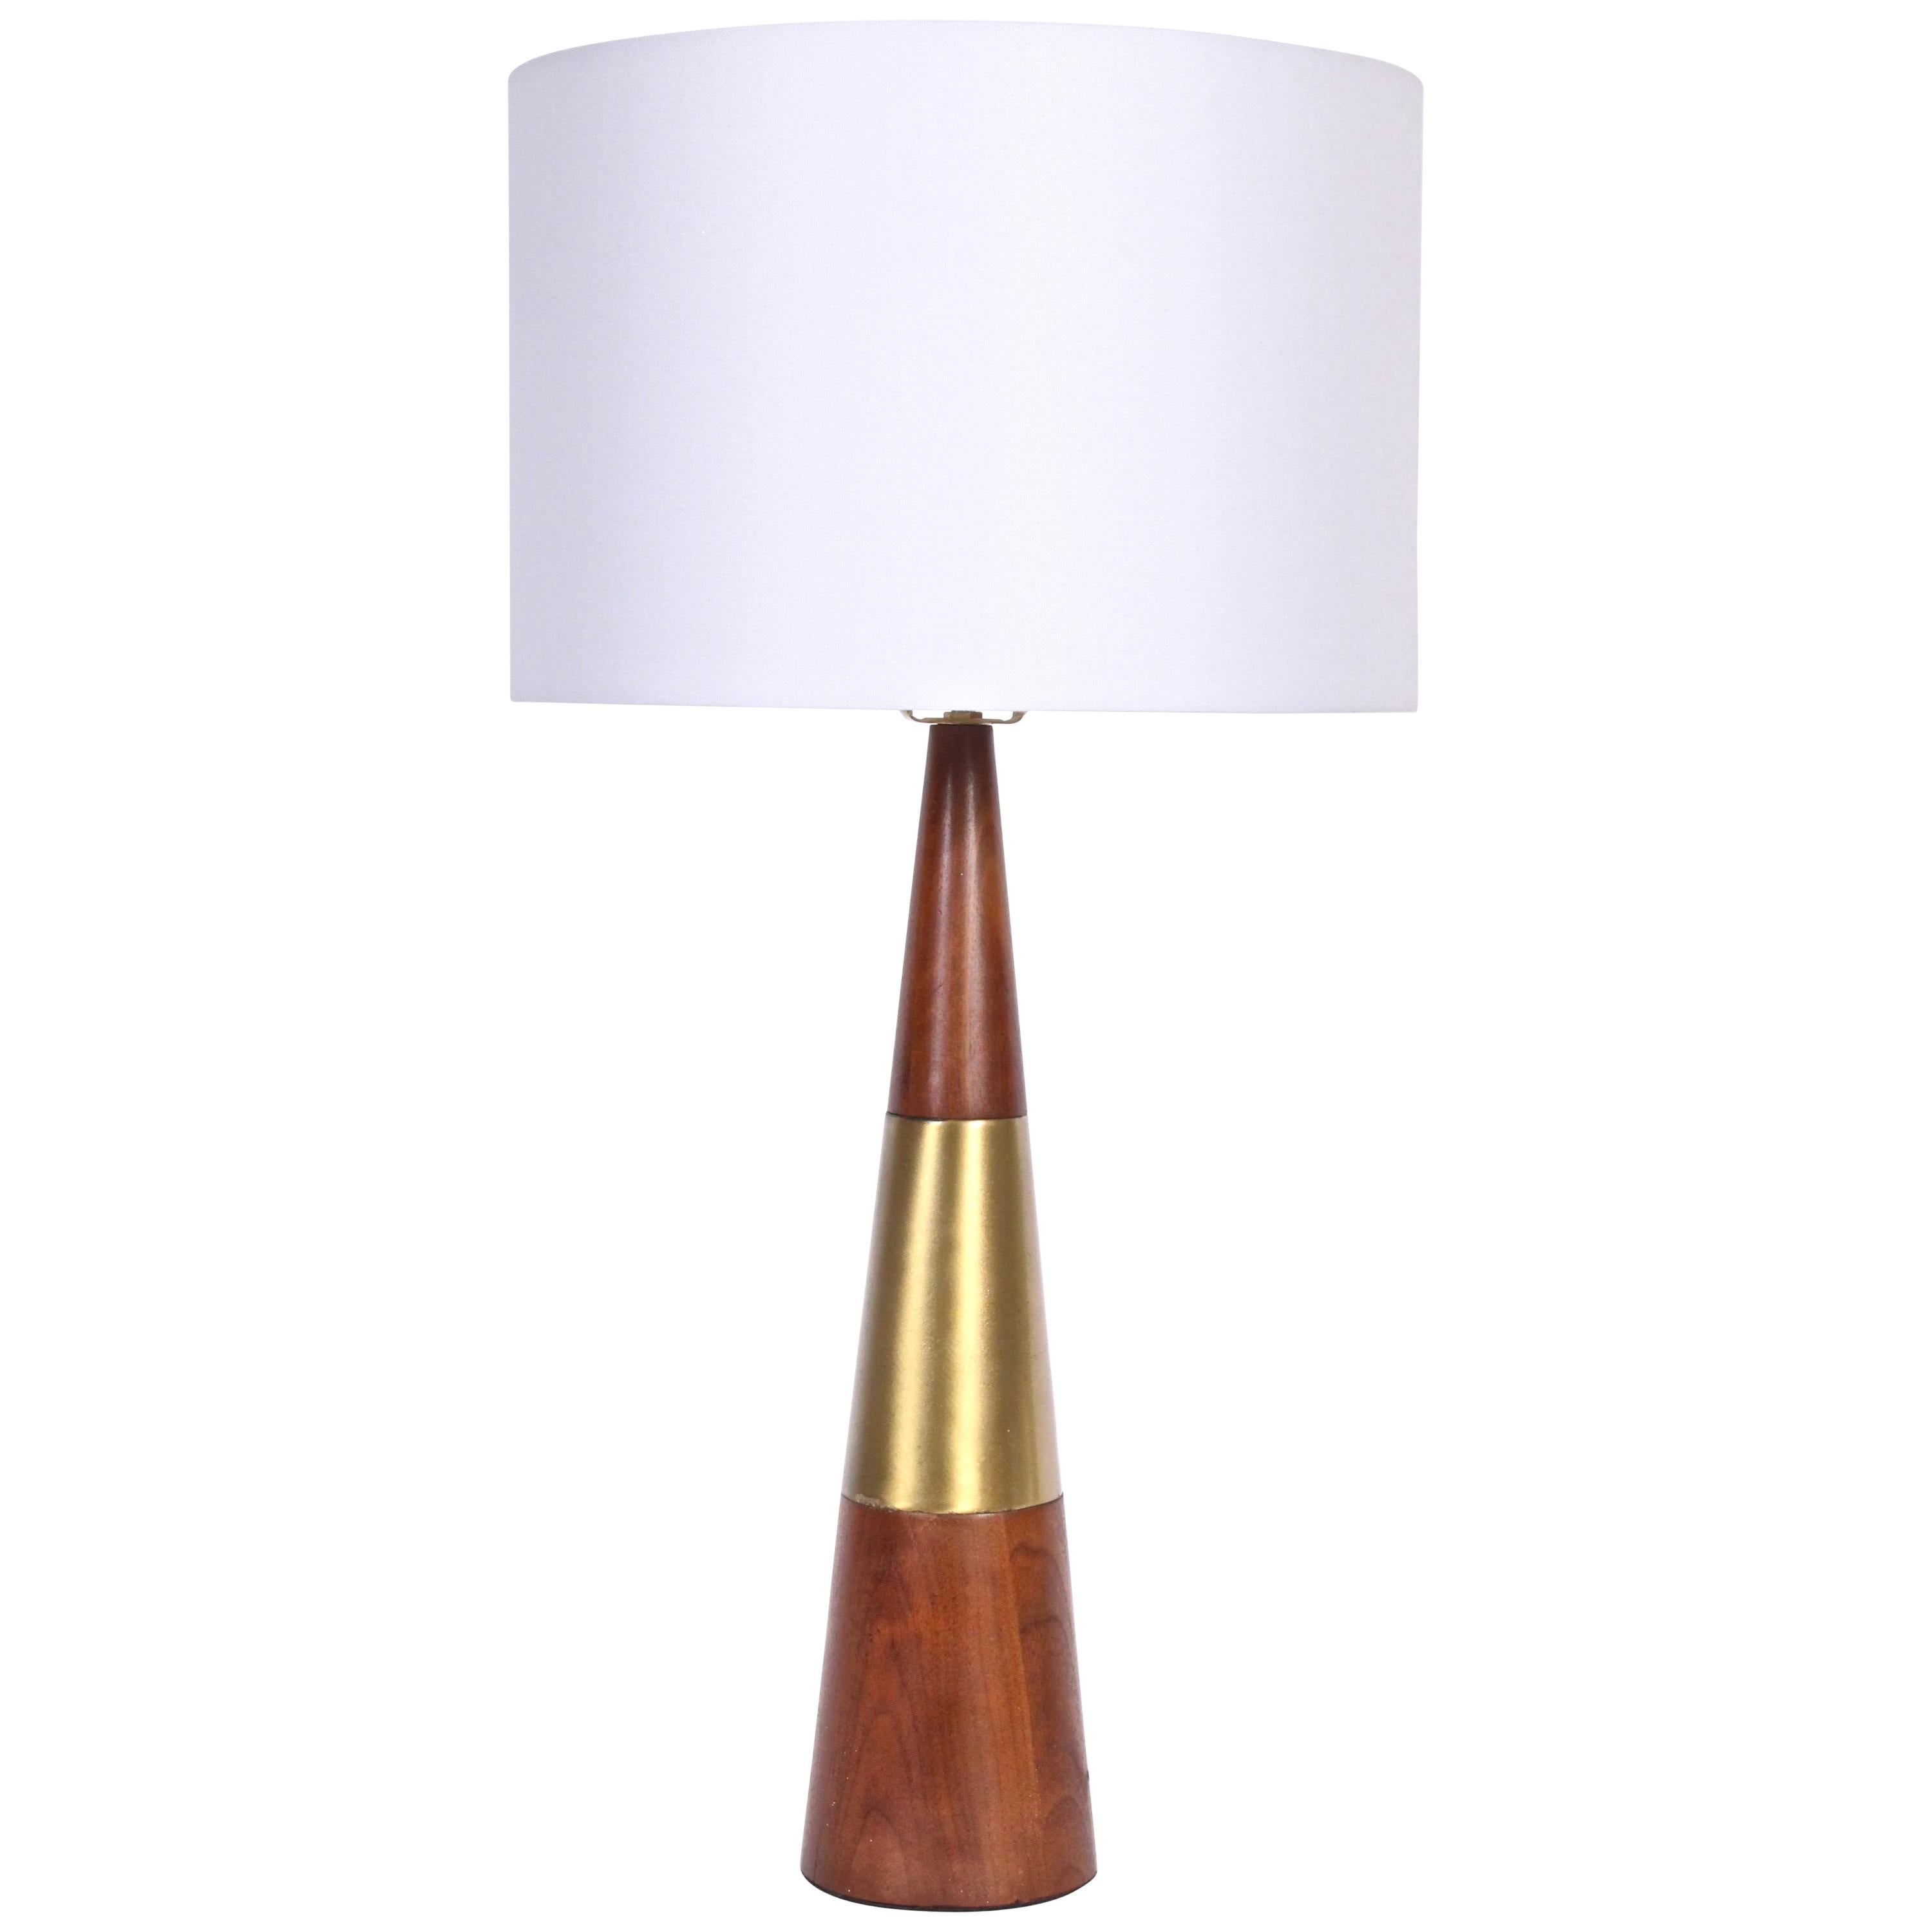 Tall Tony Paul for Westwood Swedish Brass & Solid Walnut Table Lamp, 1950s